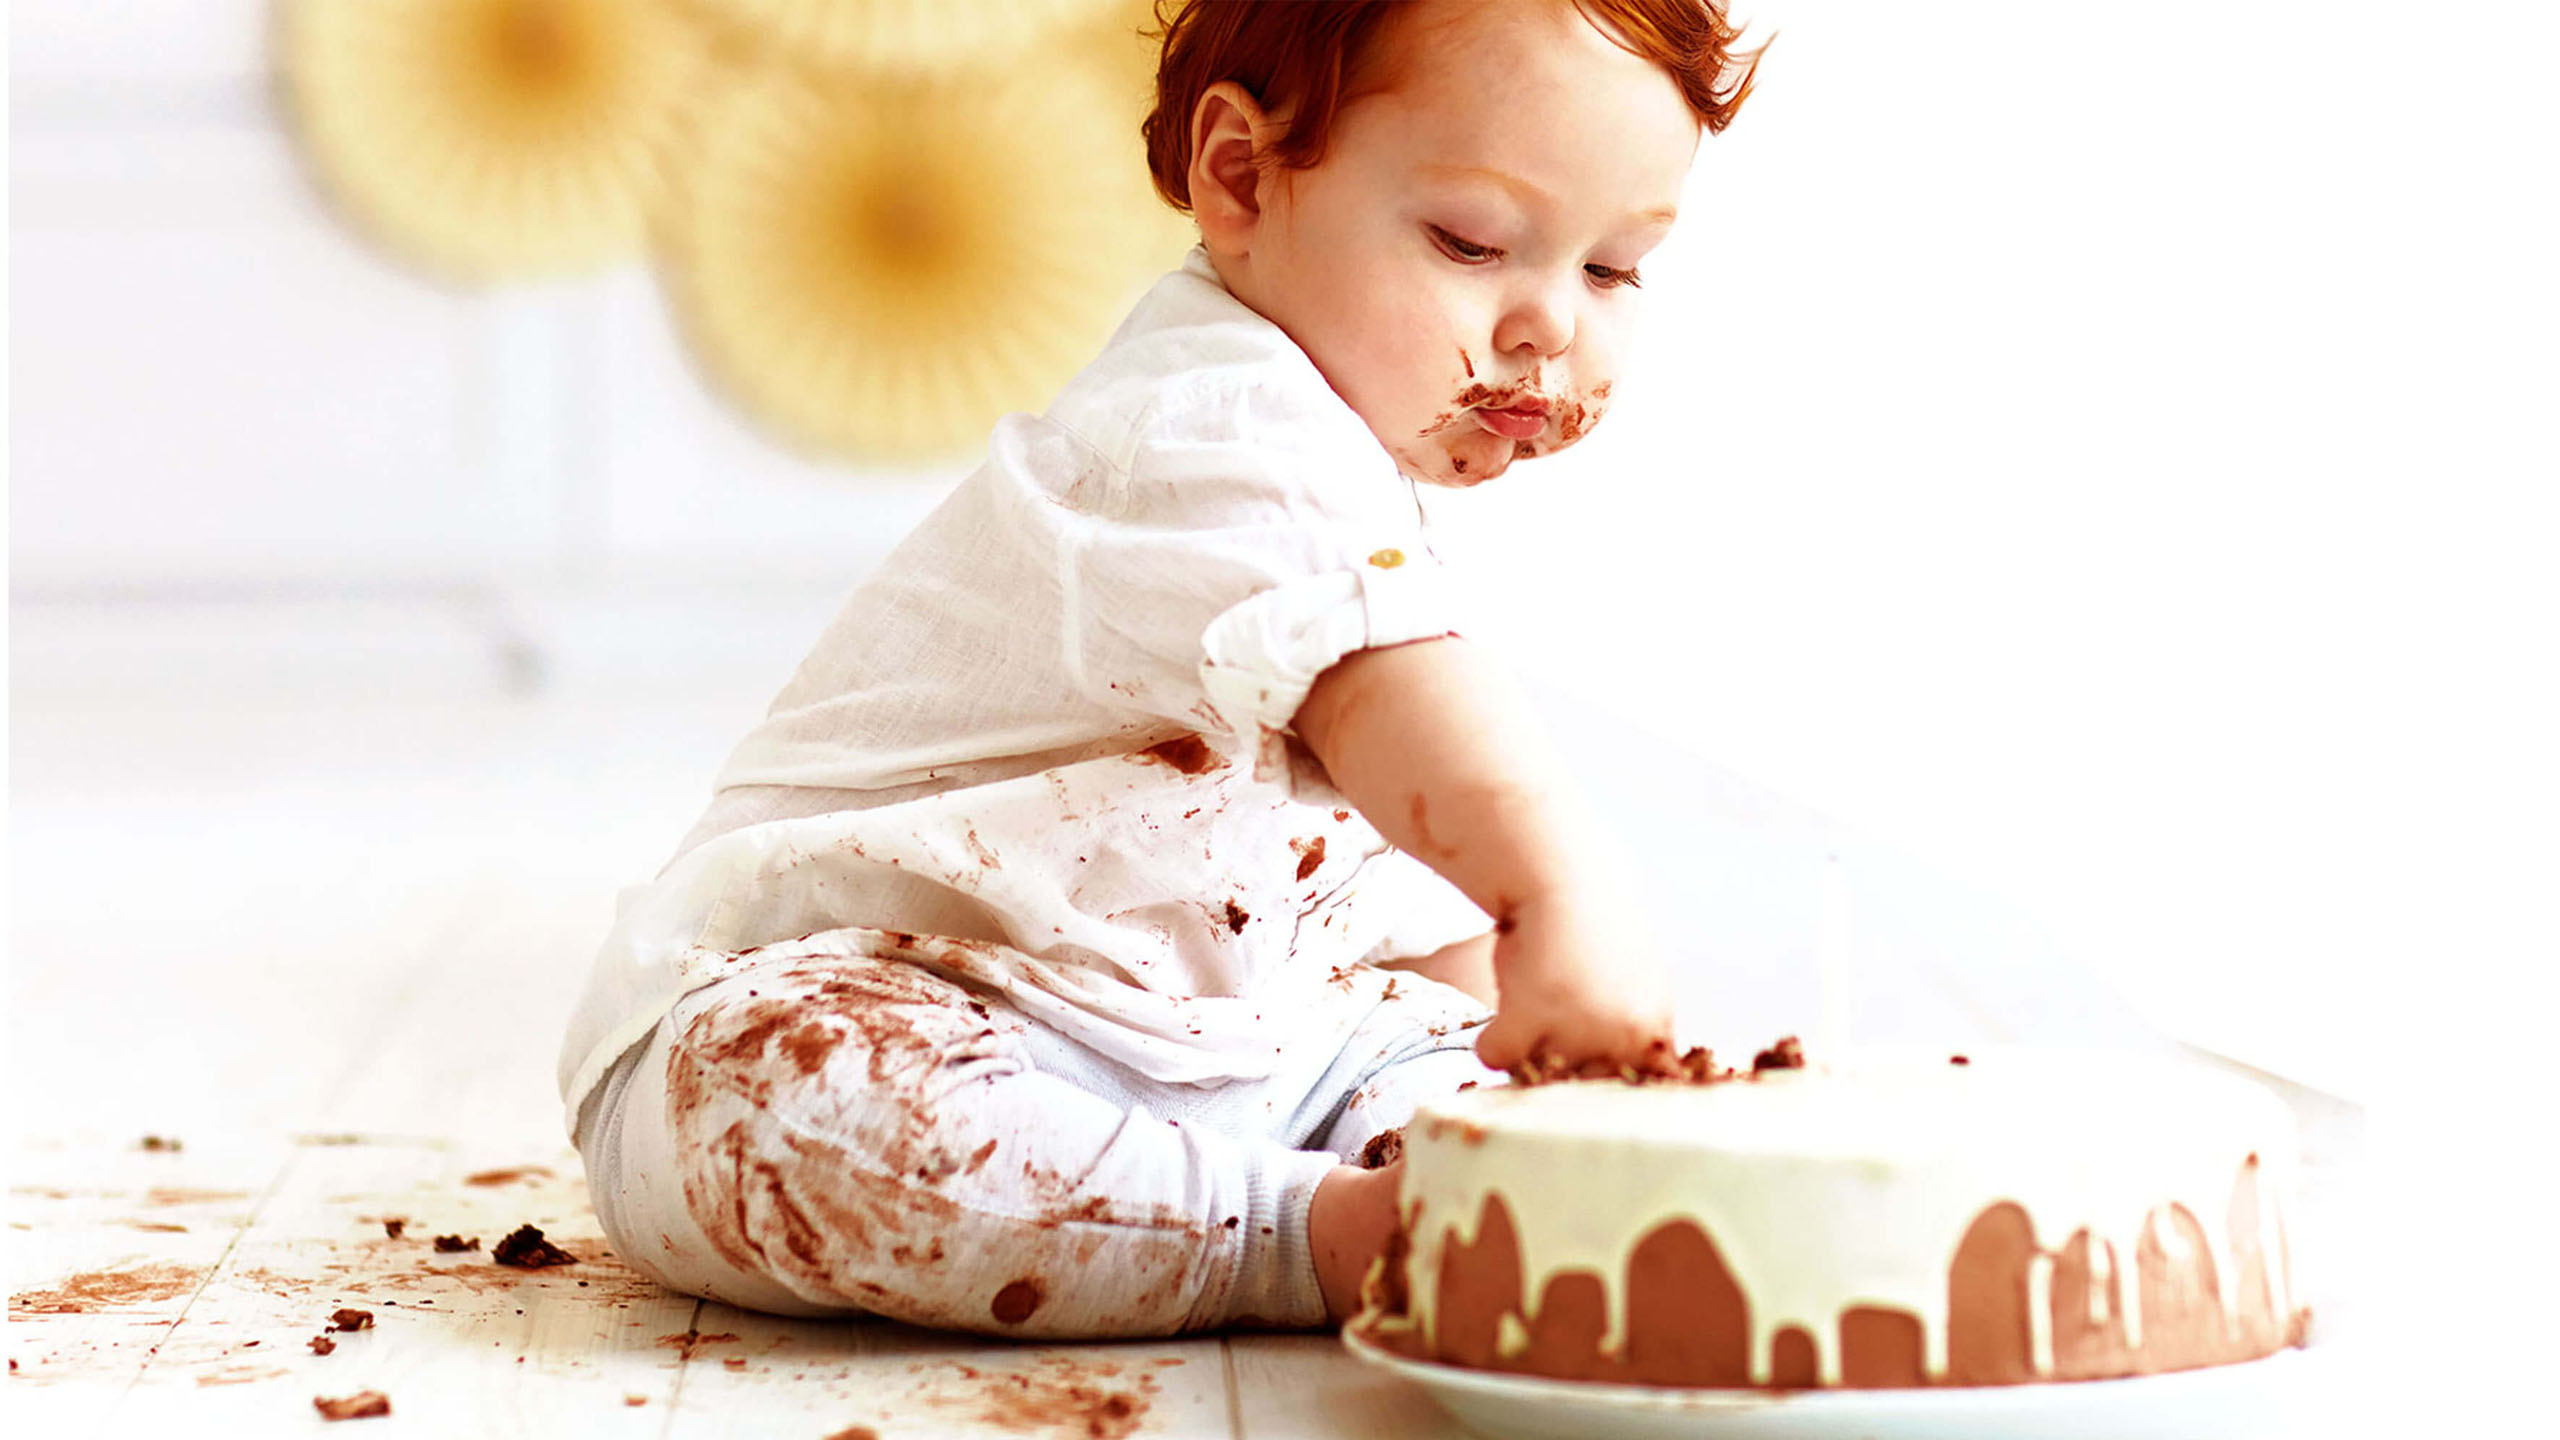 The Ultimate Healthy Baby First Birthday Smash Cake Recipe (No